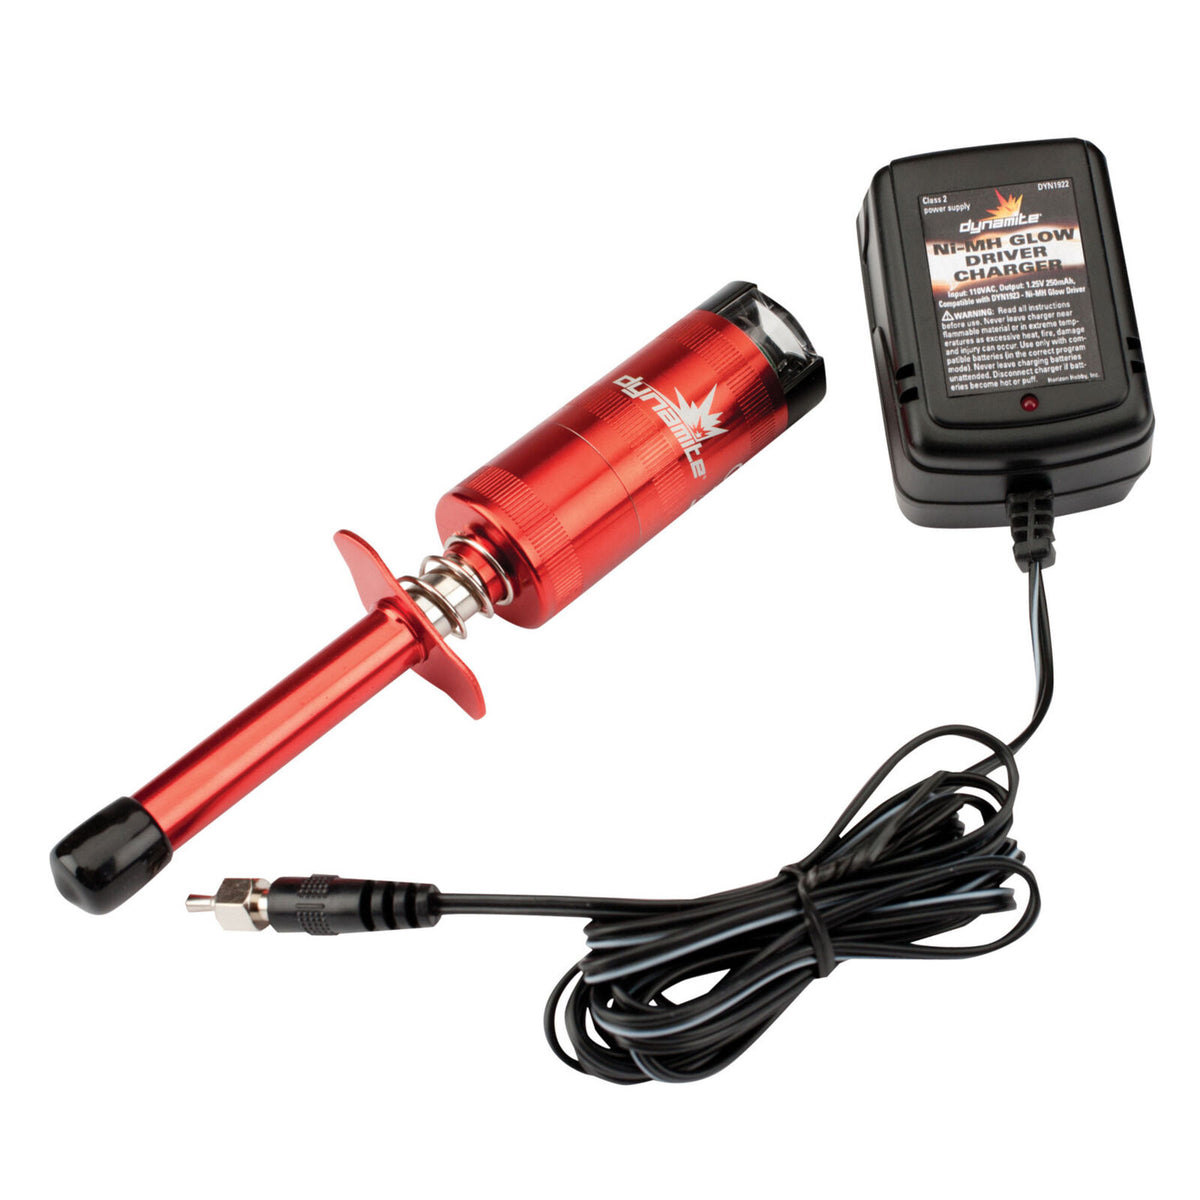 Dynamite Metered Glow Driver with 2600mAh Ni-MH & Charger (DYN1922)